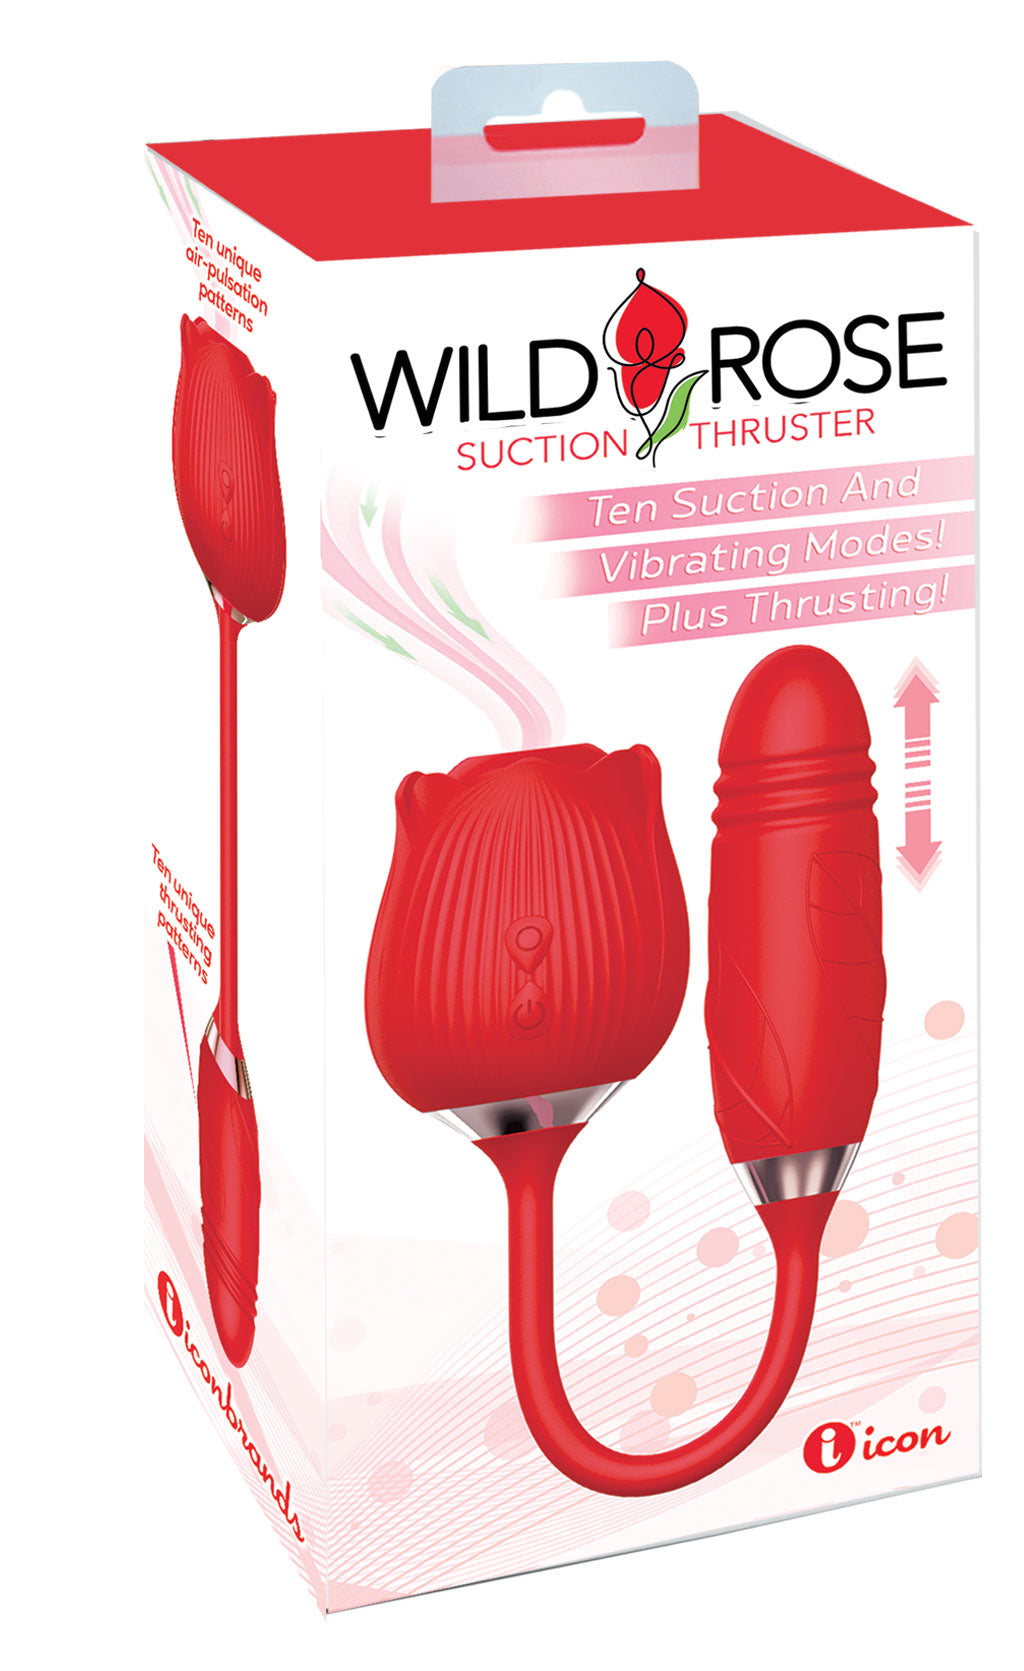 Wild Rose Suction Thruster - Red IC1702